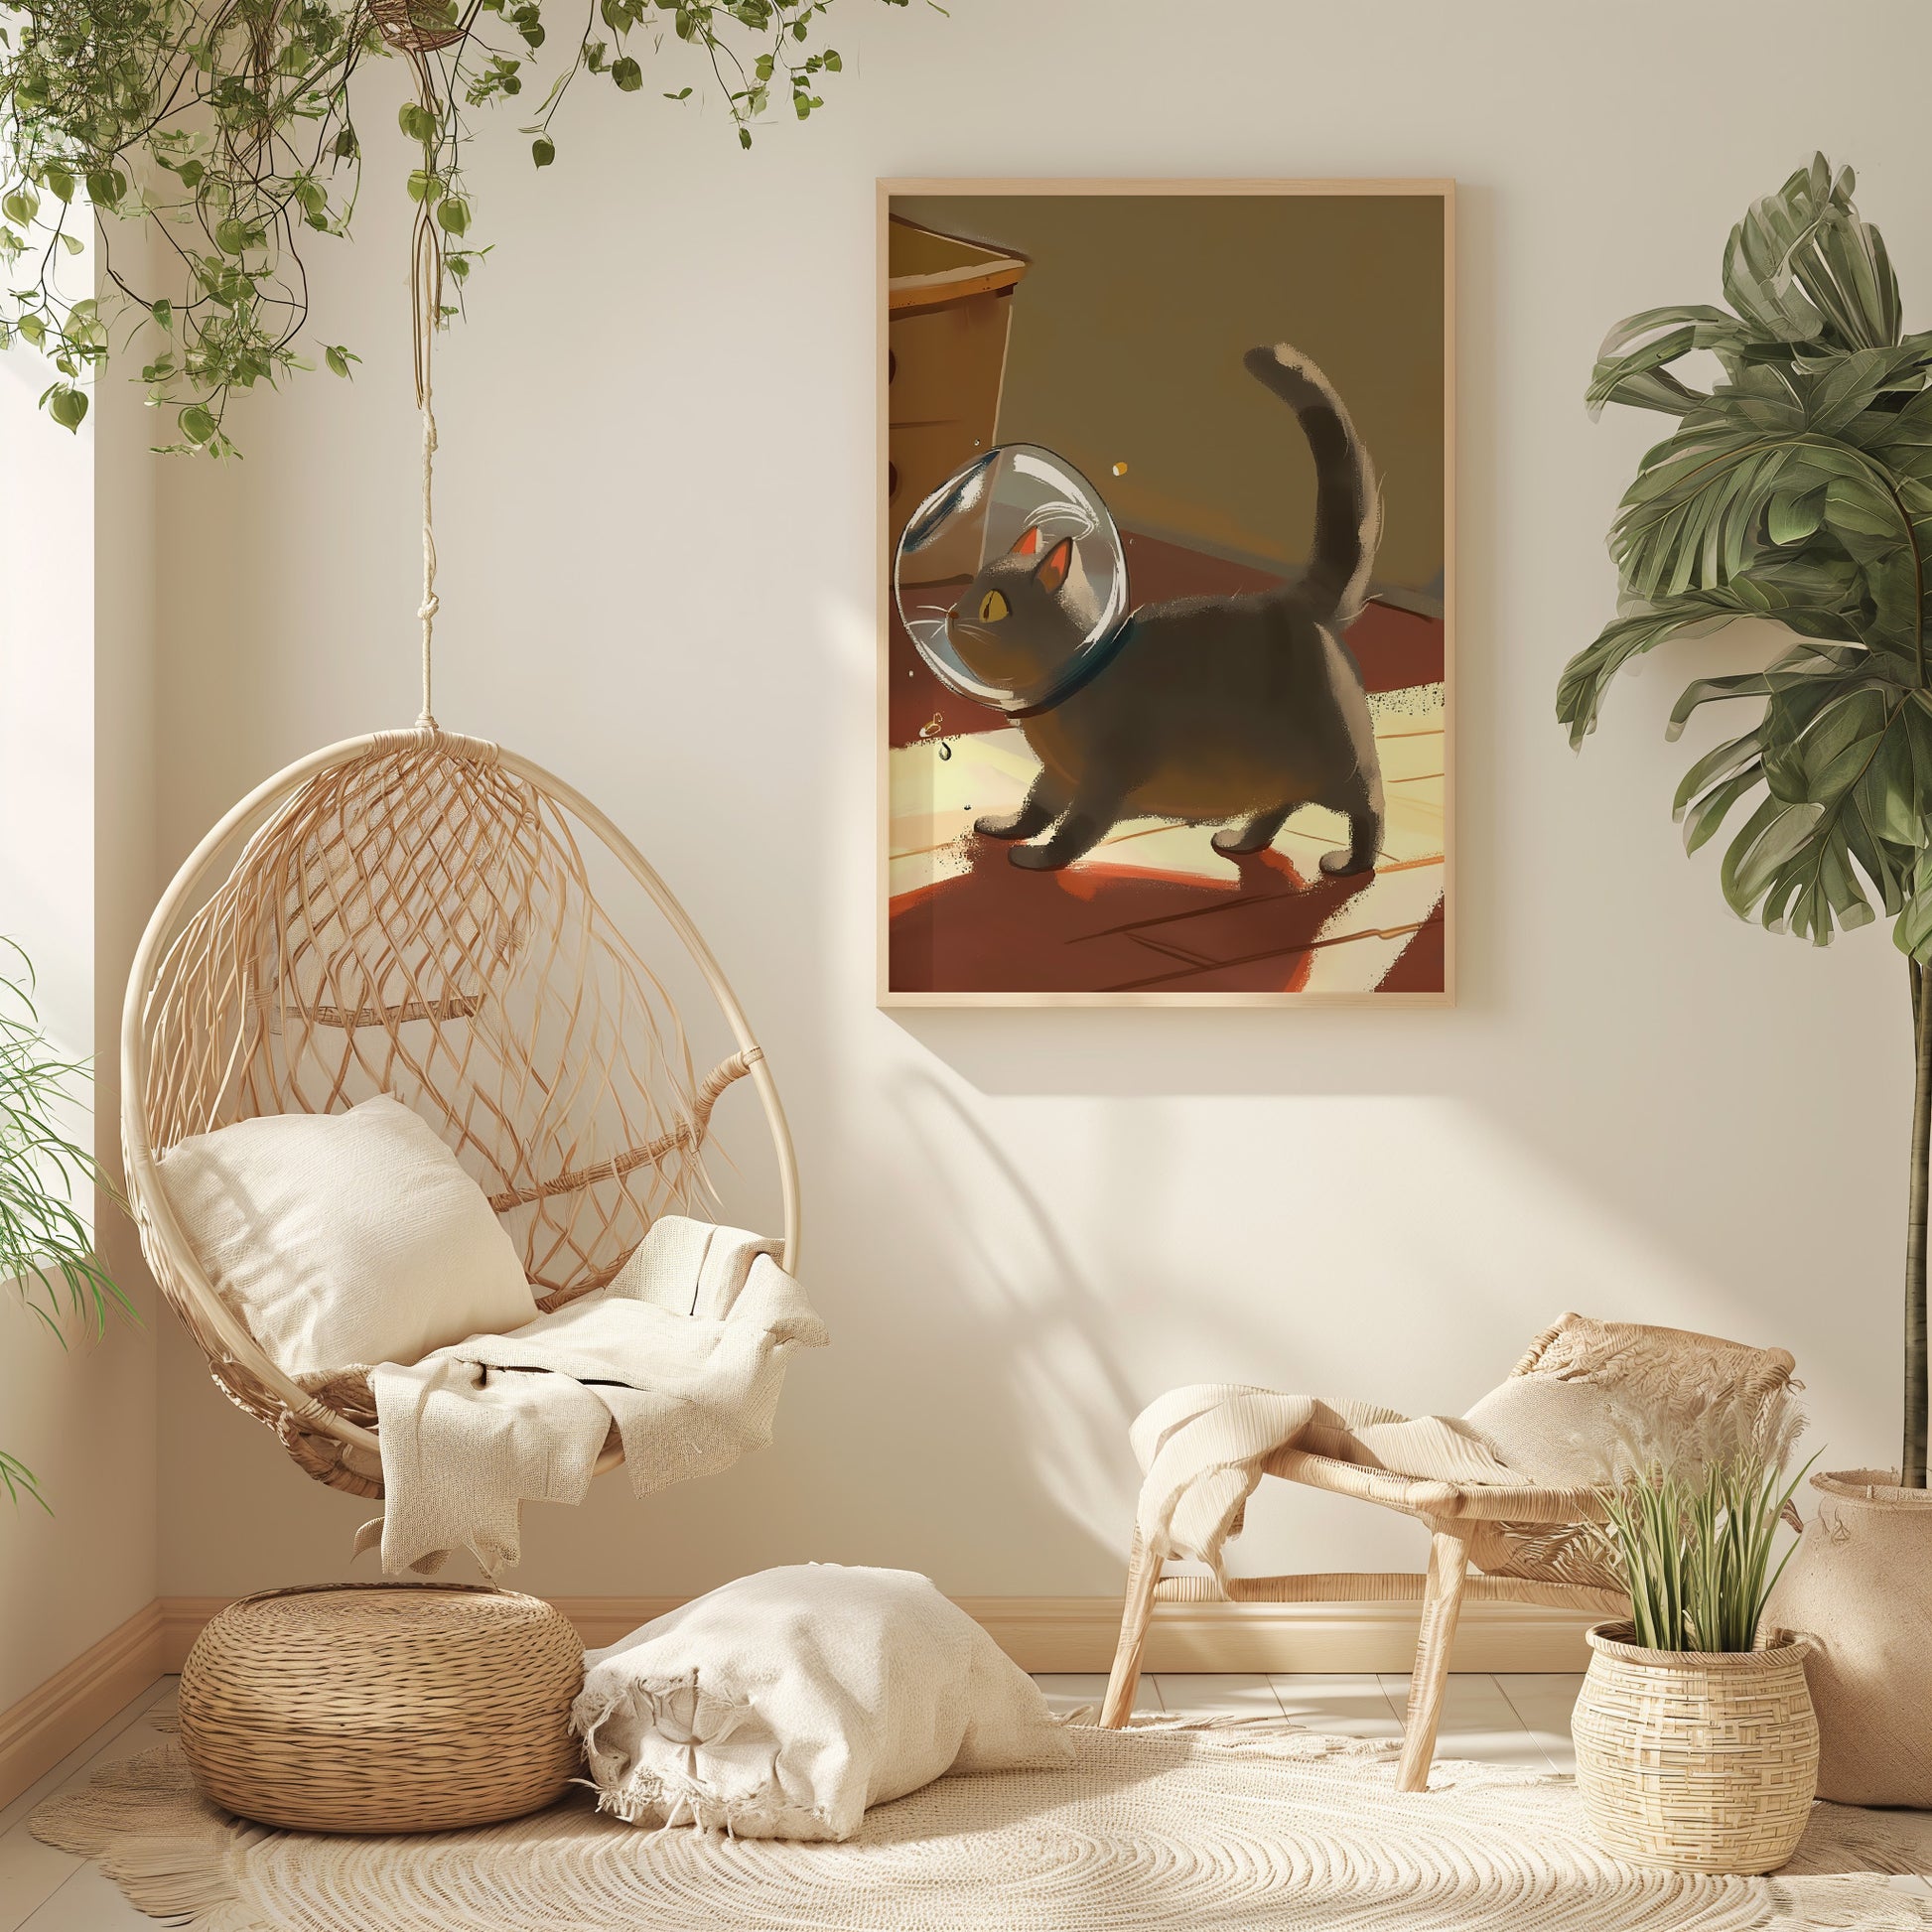 A cozy room with a hanging chair, plants, and a framed picture of a cat on the wall.